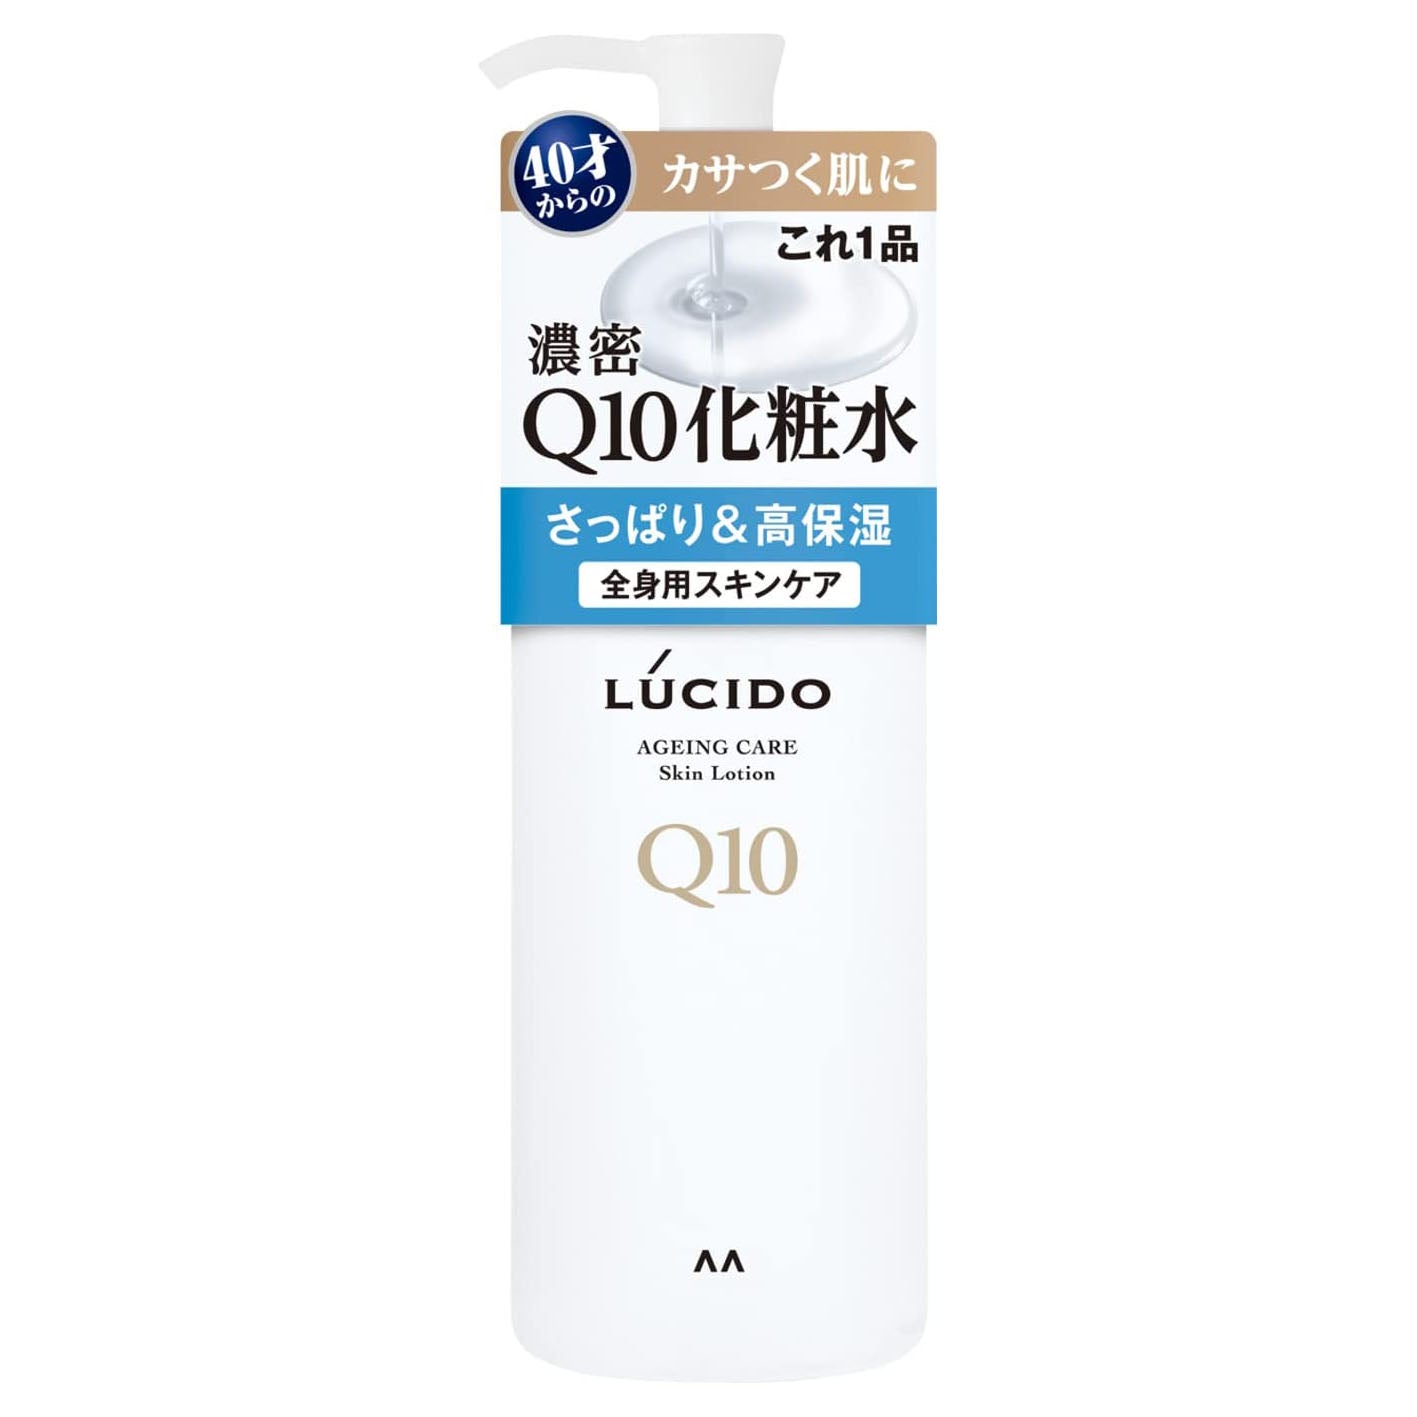 Lucido Q10 Lotion 300ml - Harajuku Culture Japan - Japanease Products Store Beauty and Stationery